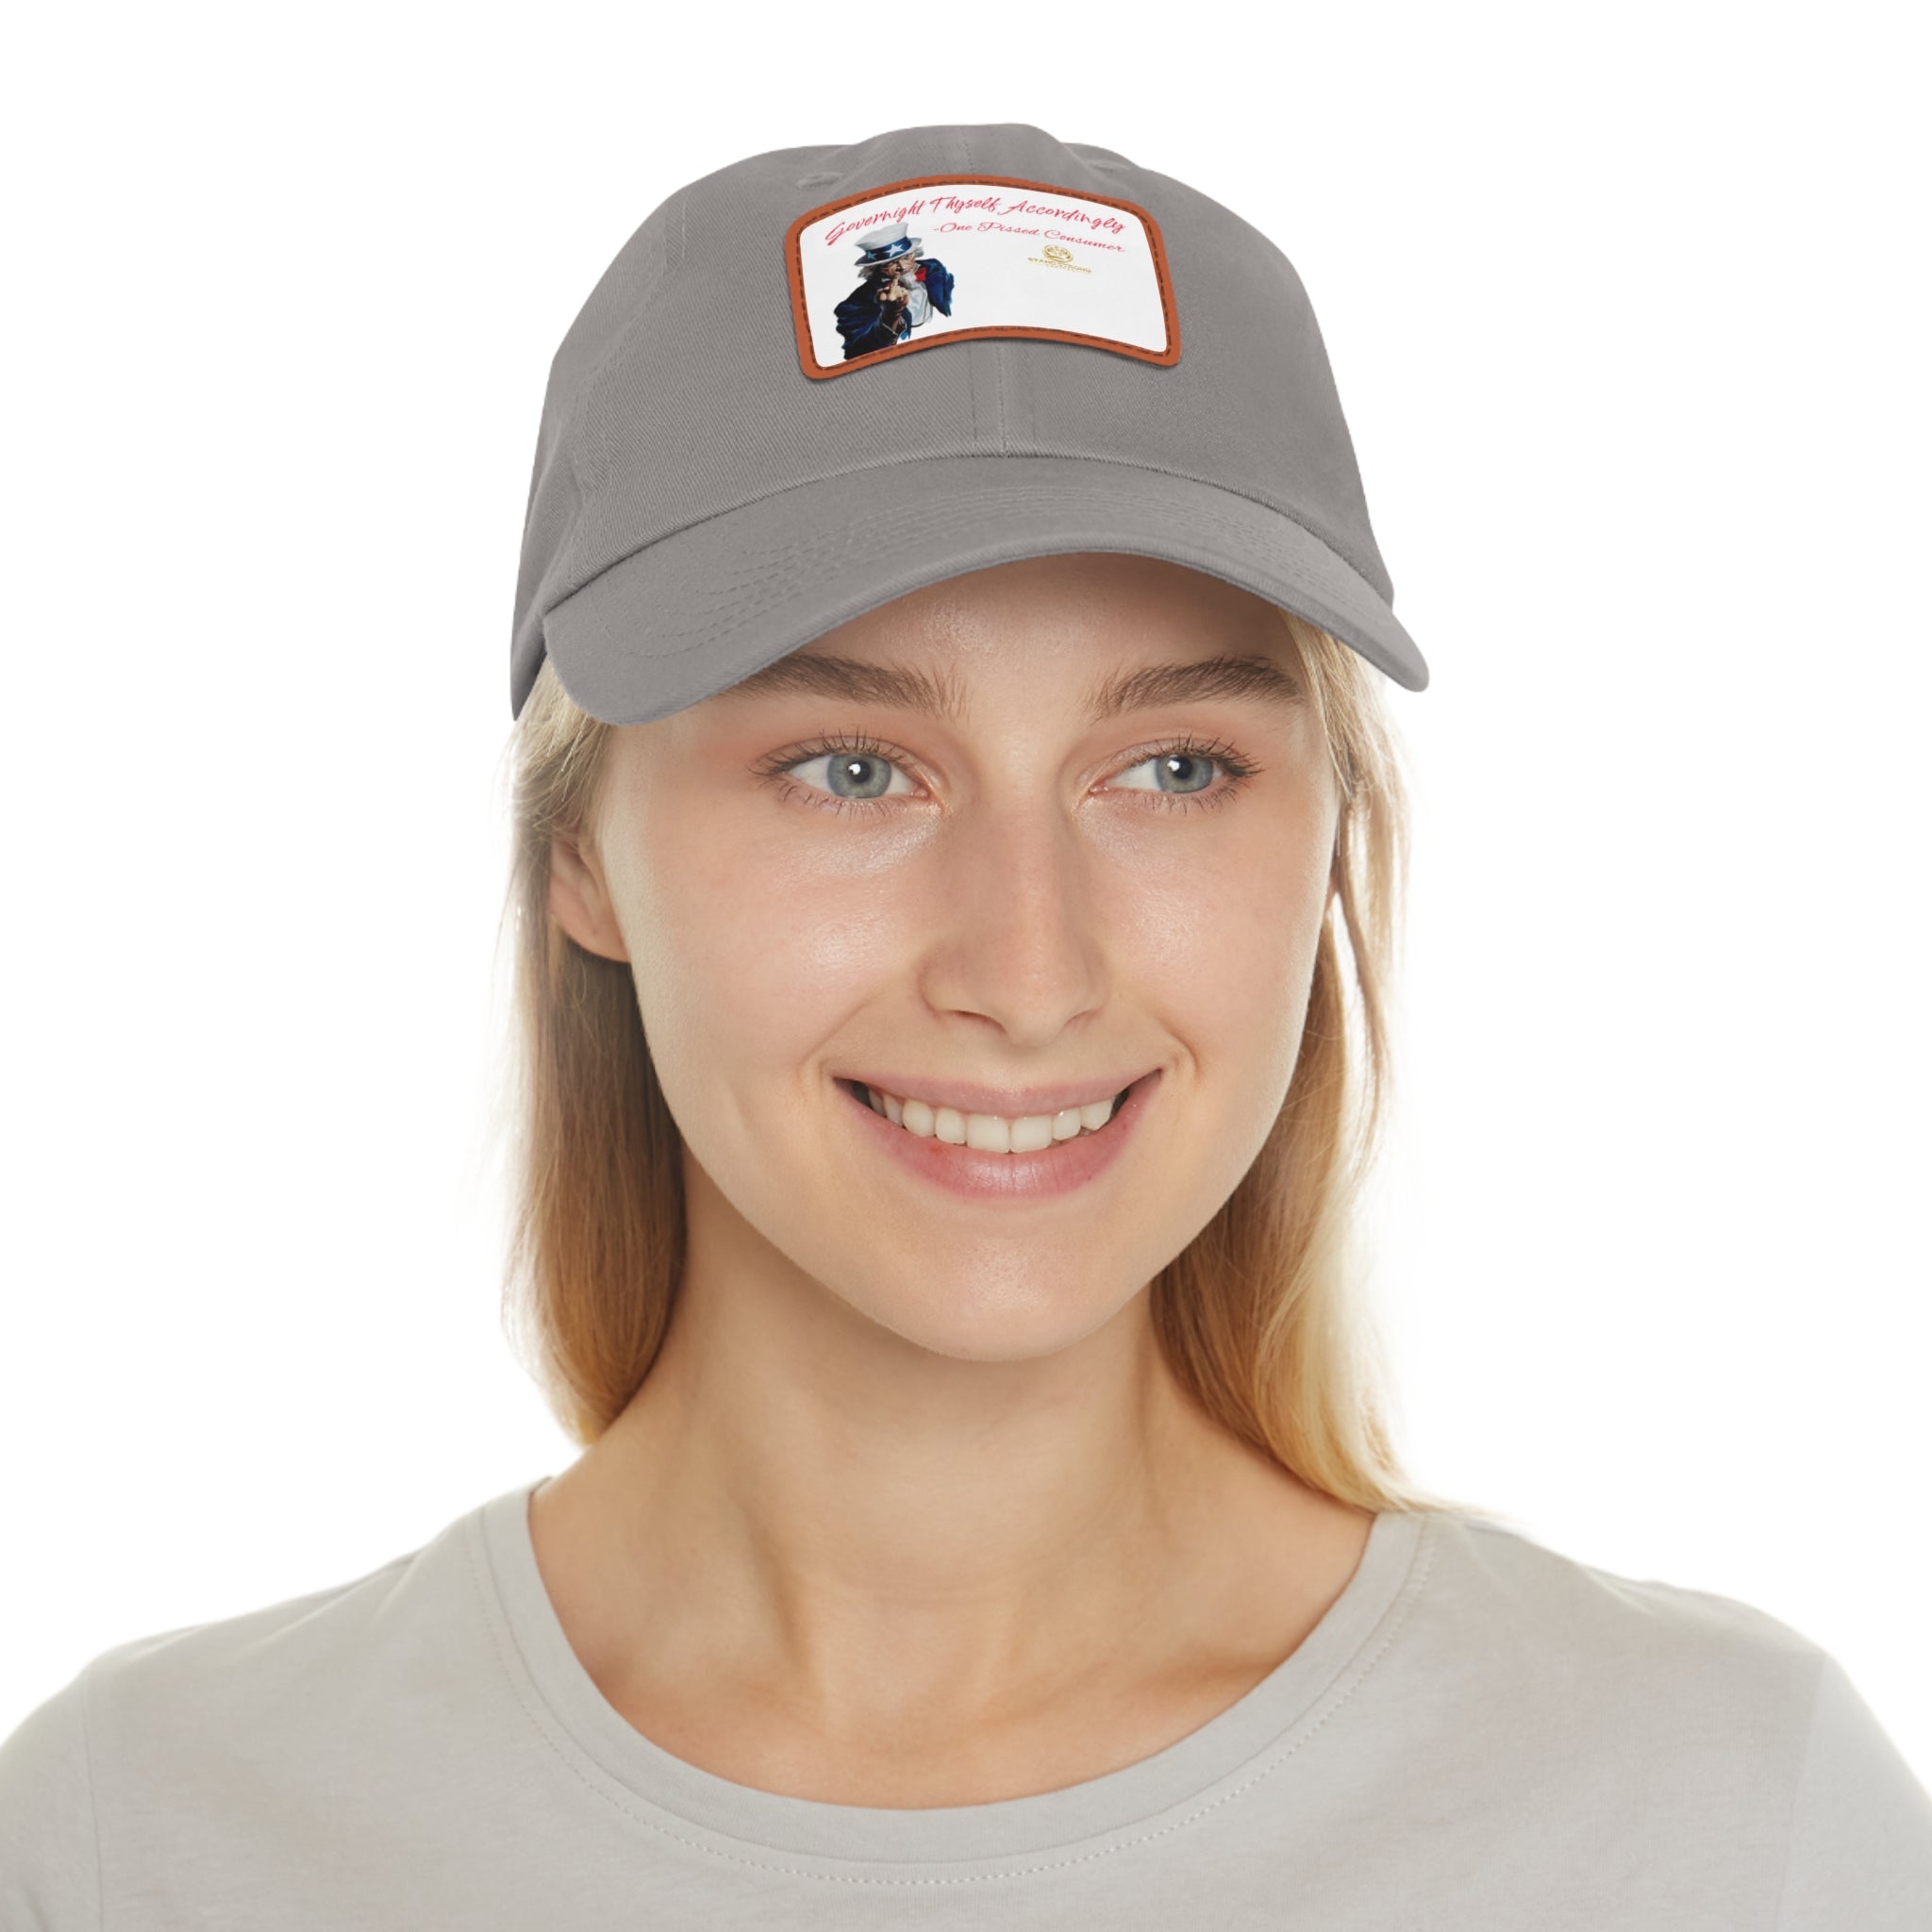 SSC_GovernThyself_Dad Hat with Leather Patch (Rectangle)